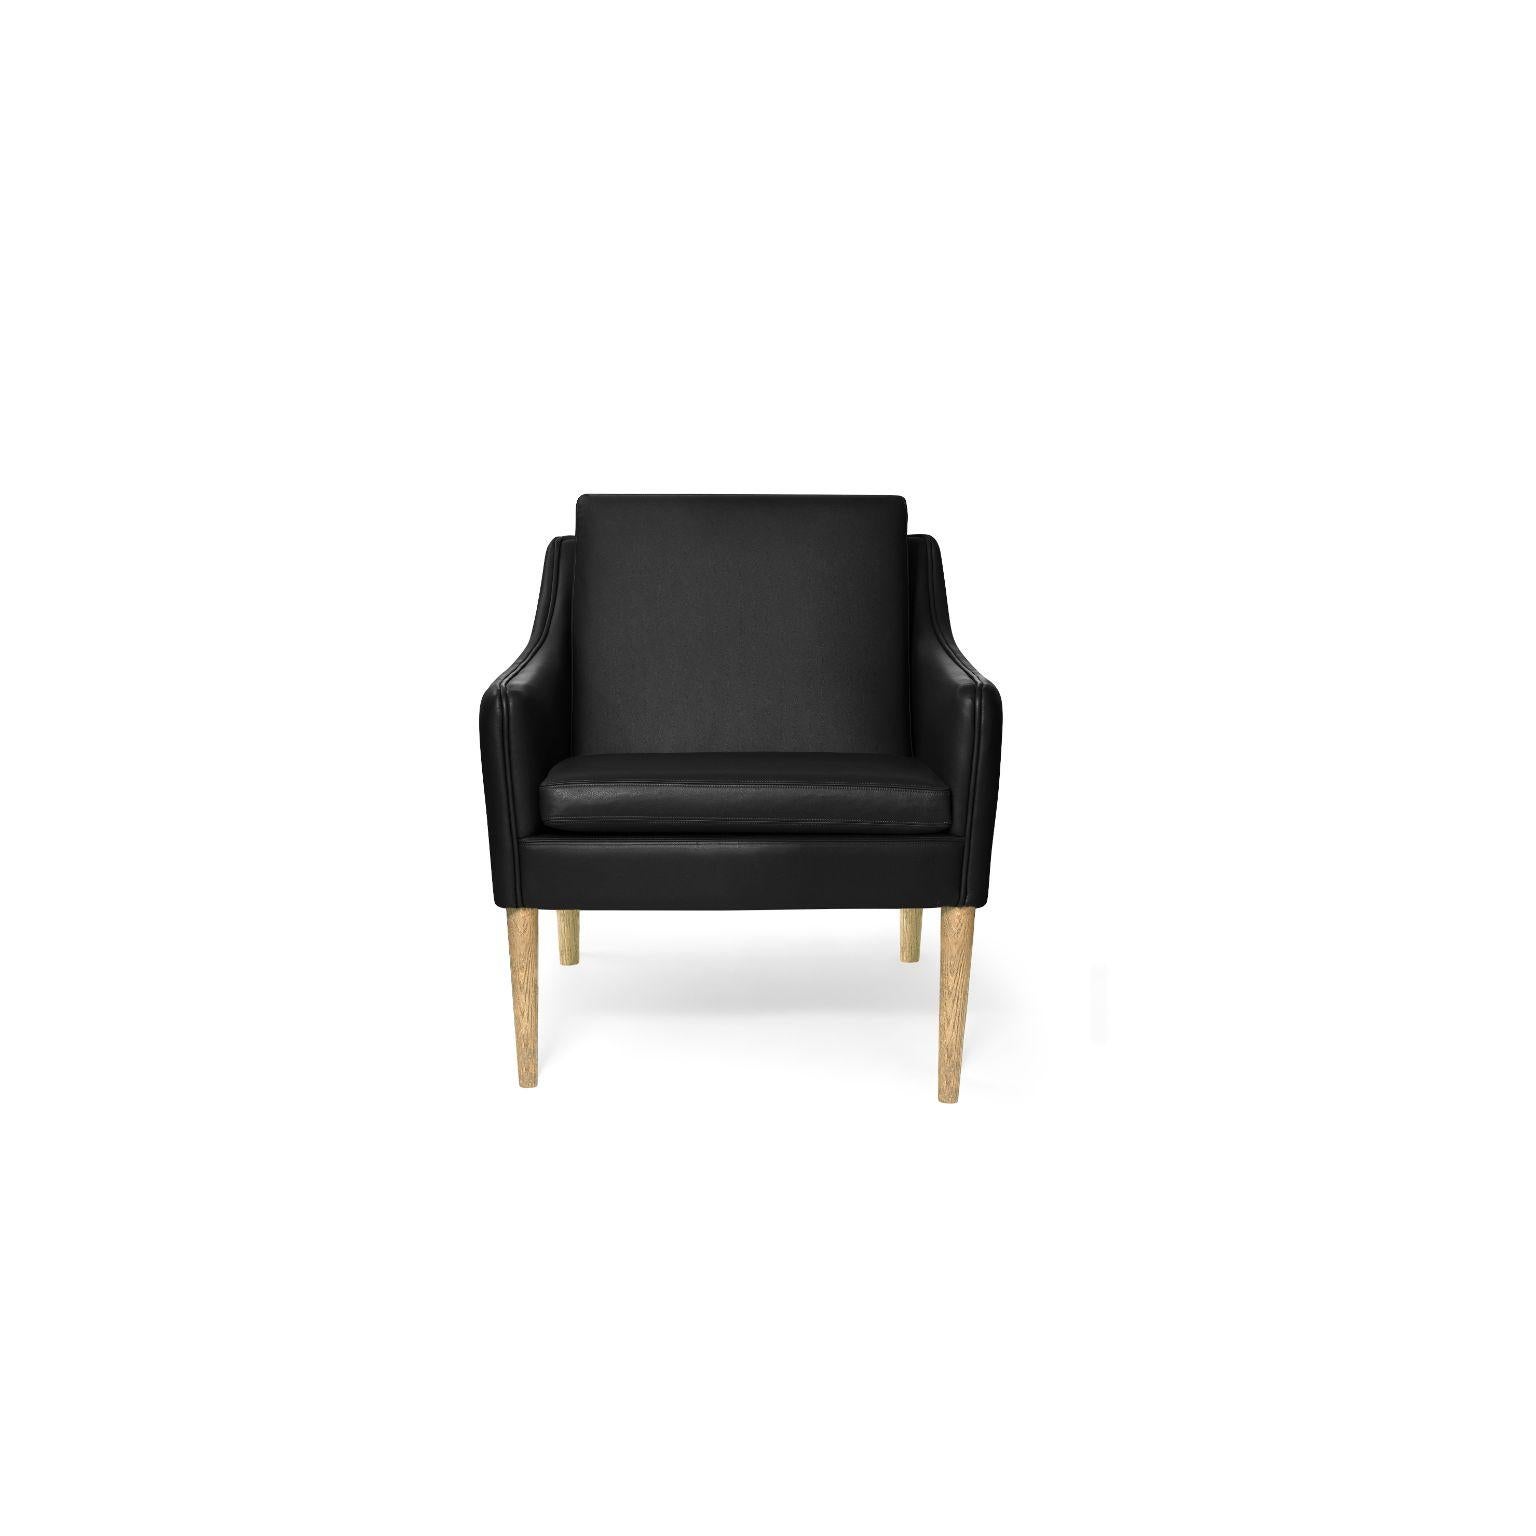 Mr. Olsen lounge chair solid smoked oak black leather by Warm Nordic
Dimensions: D 81 x W 79 x H 78 cm
Material: Textile upholstery, foam, spring system, oak, leather
Weight: 27 kg
Also available in different colours, materials and finishes.

A